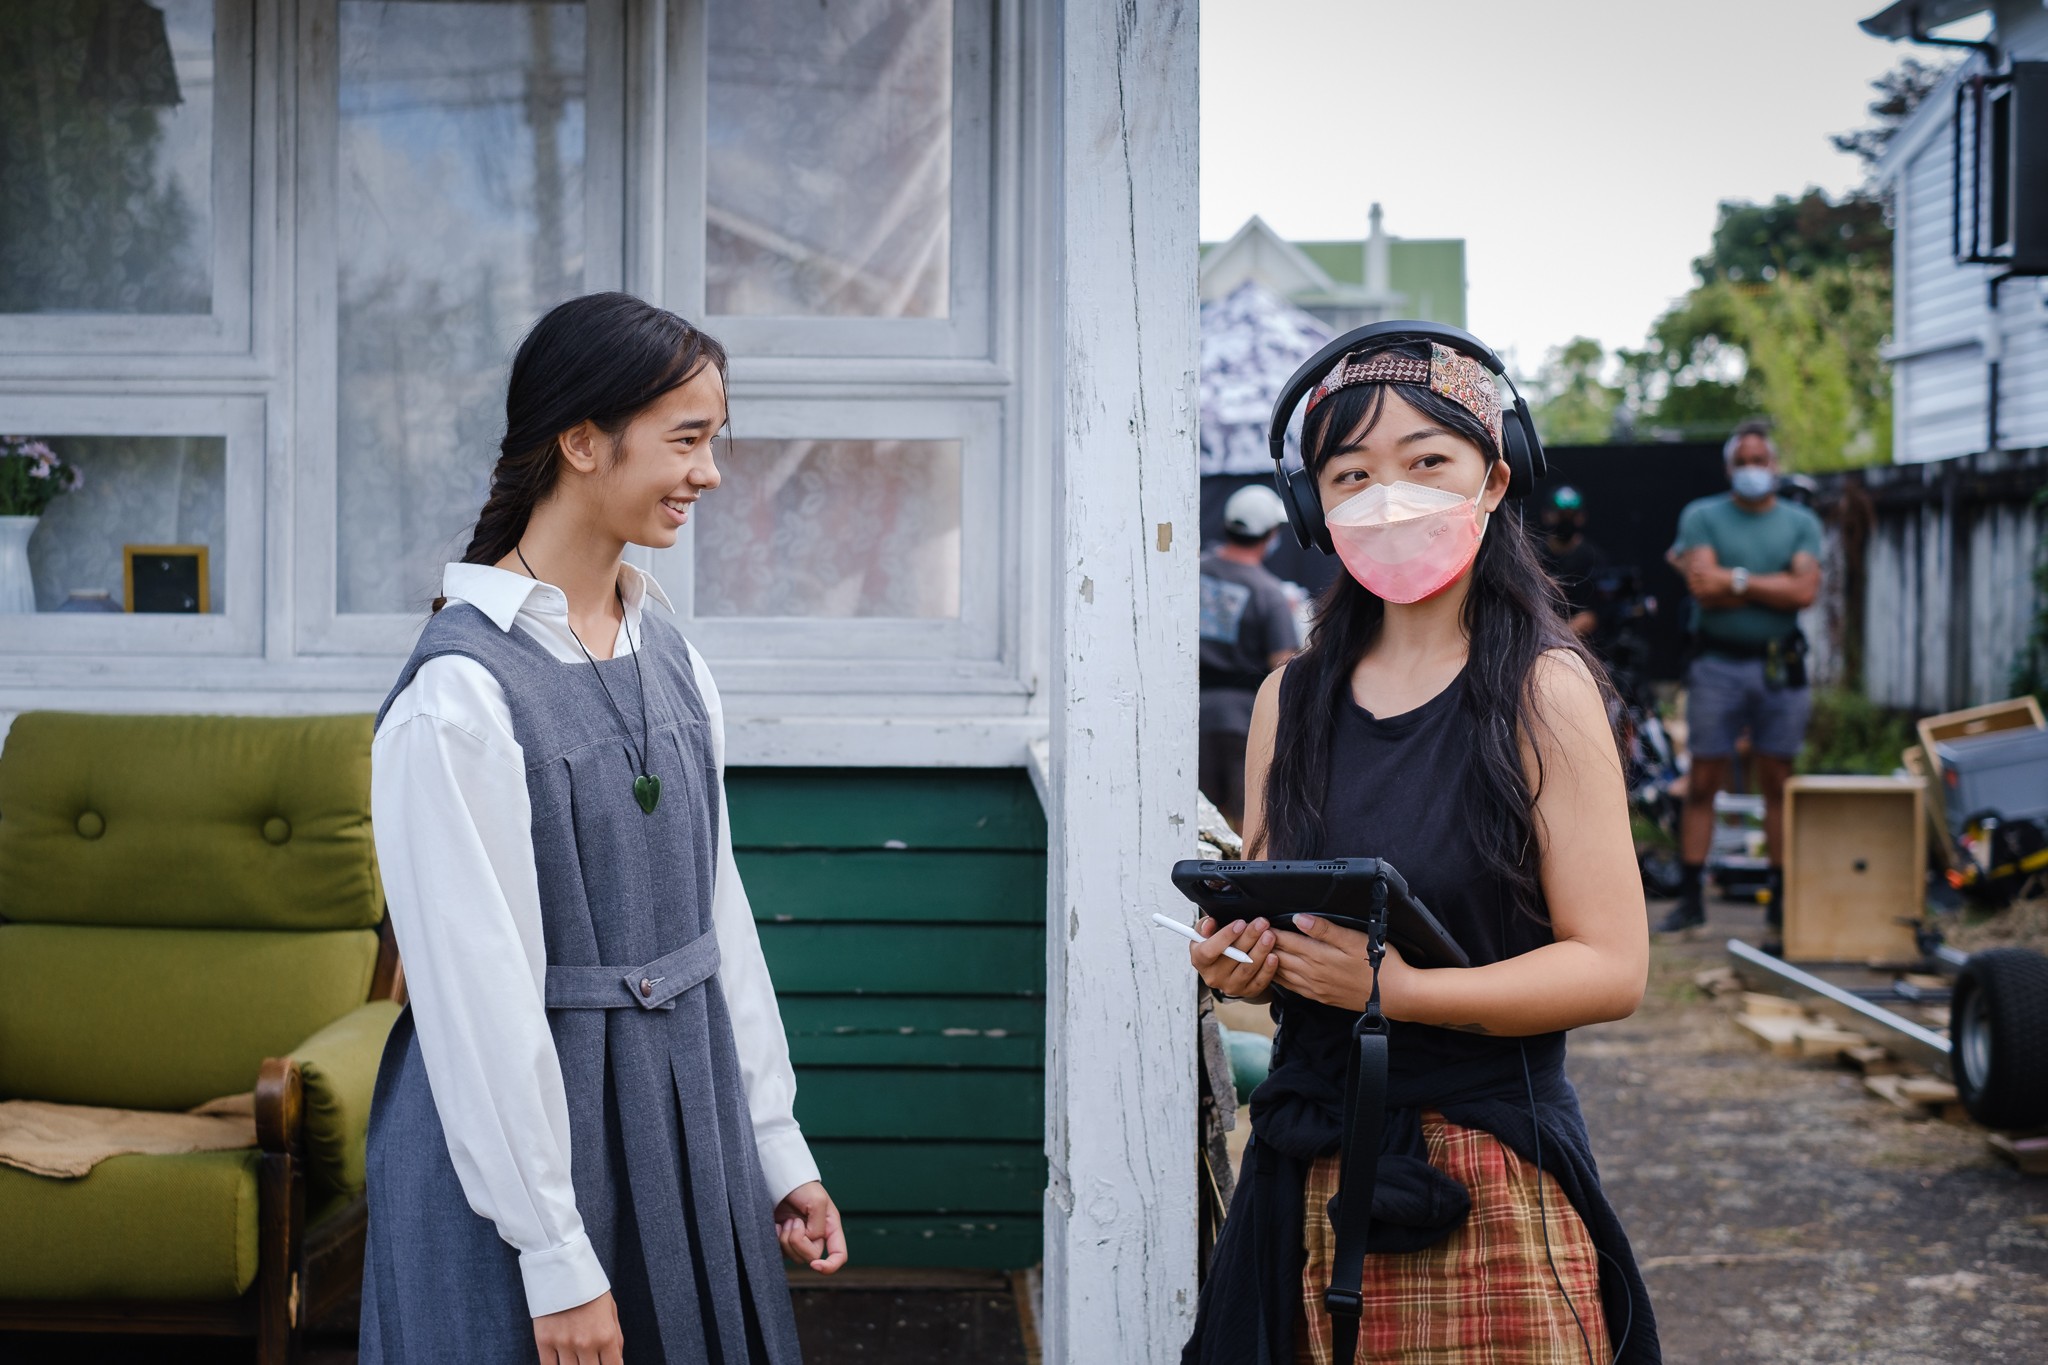 Two people standing outdoors on a film set. One is wearing headphones and holding an ipad while wearing an N95 mask while the other (actor) is smiling at them